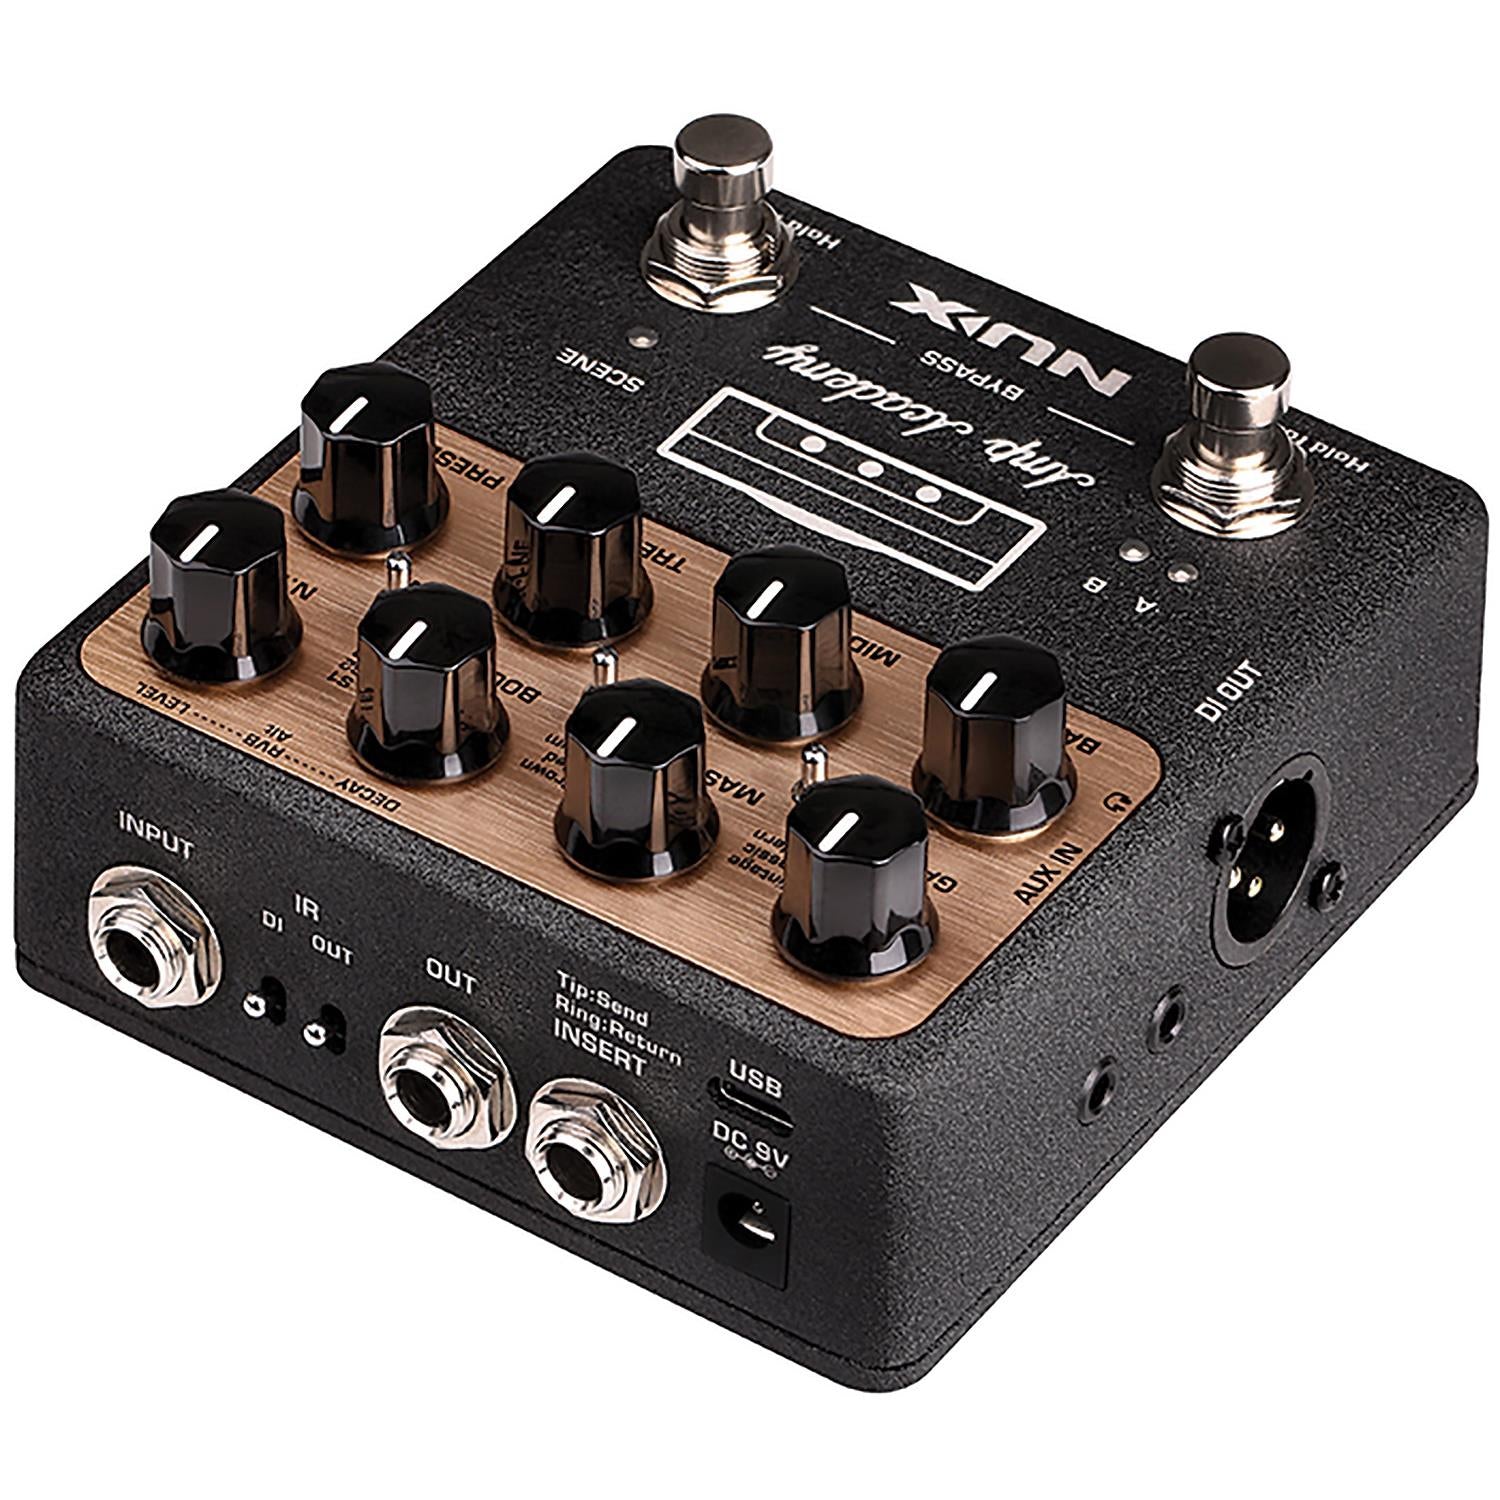 NUX Amp Academy Pedal